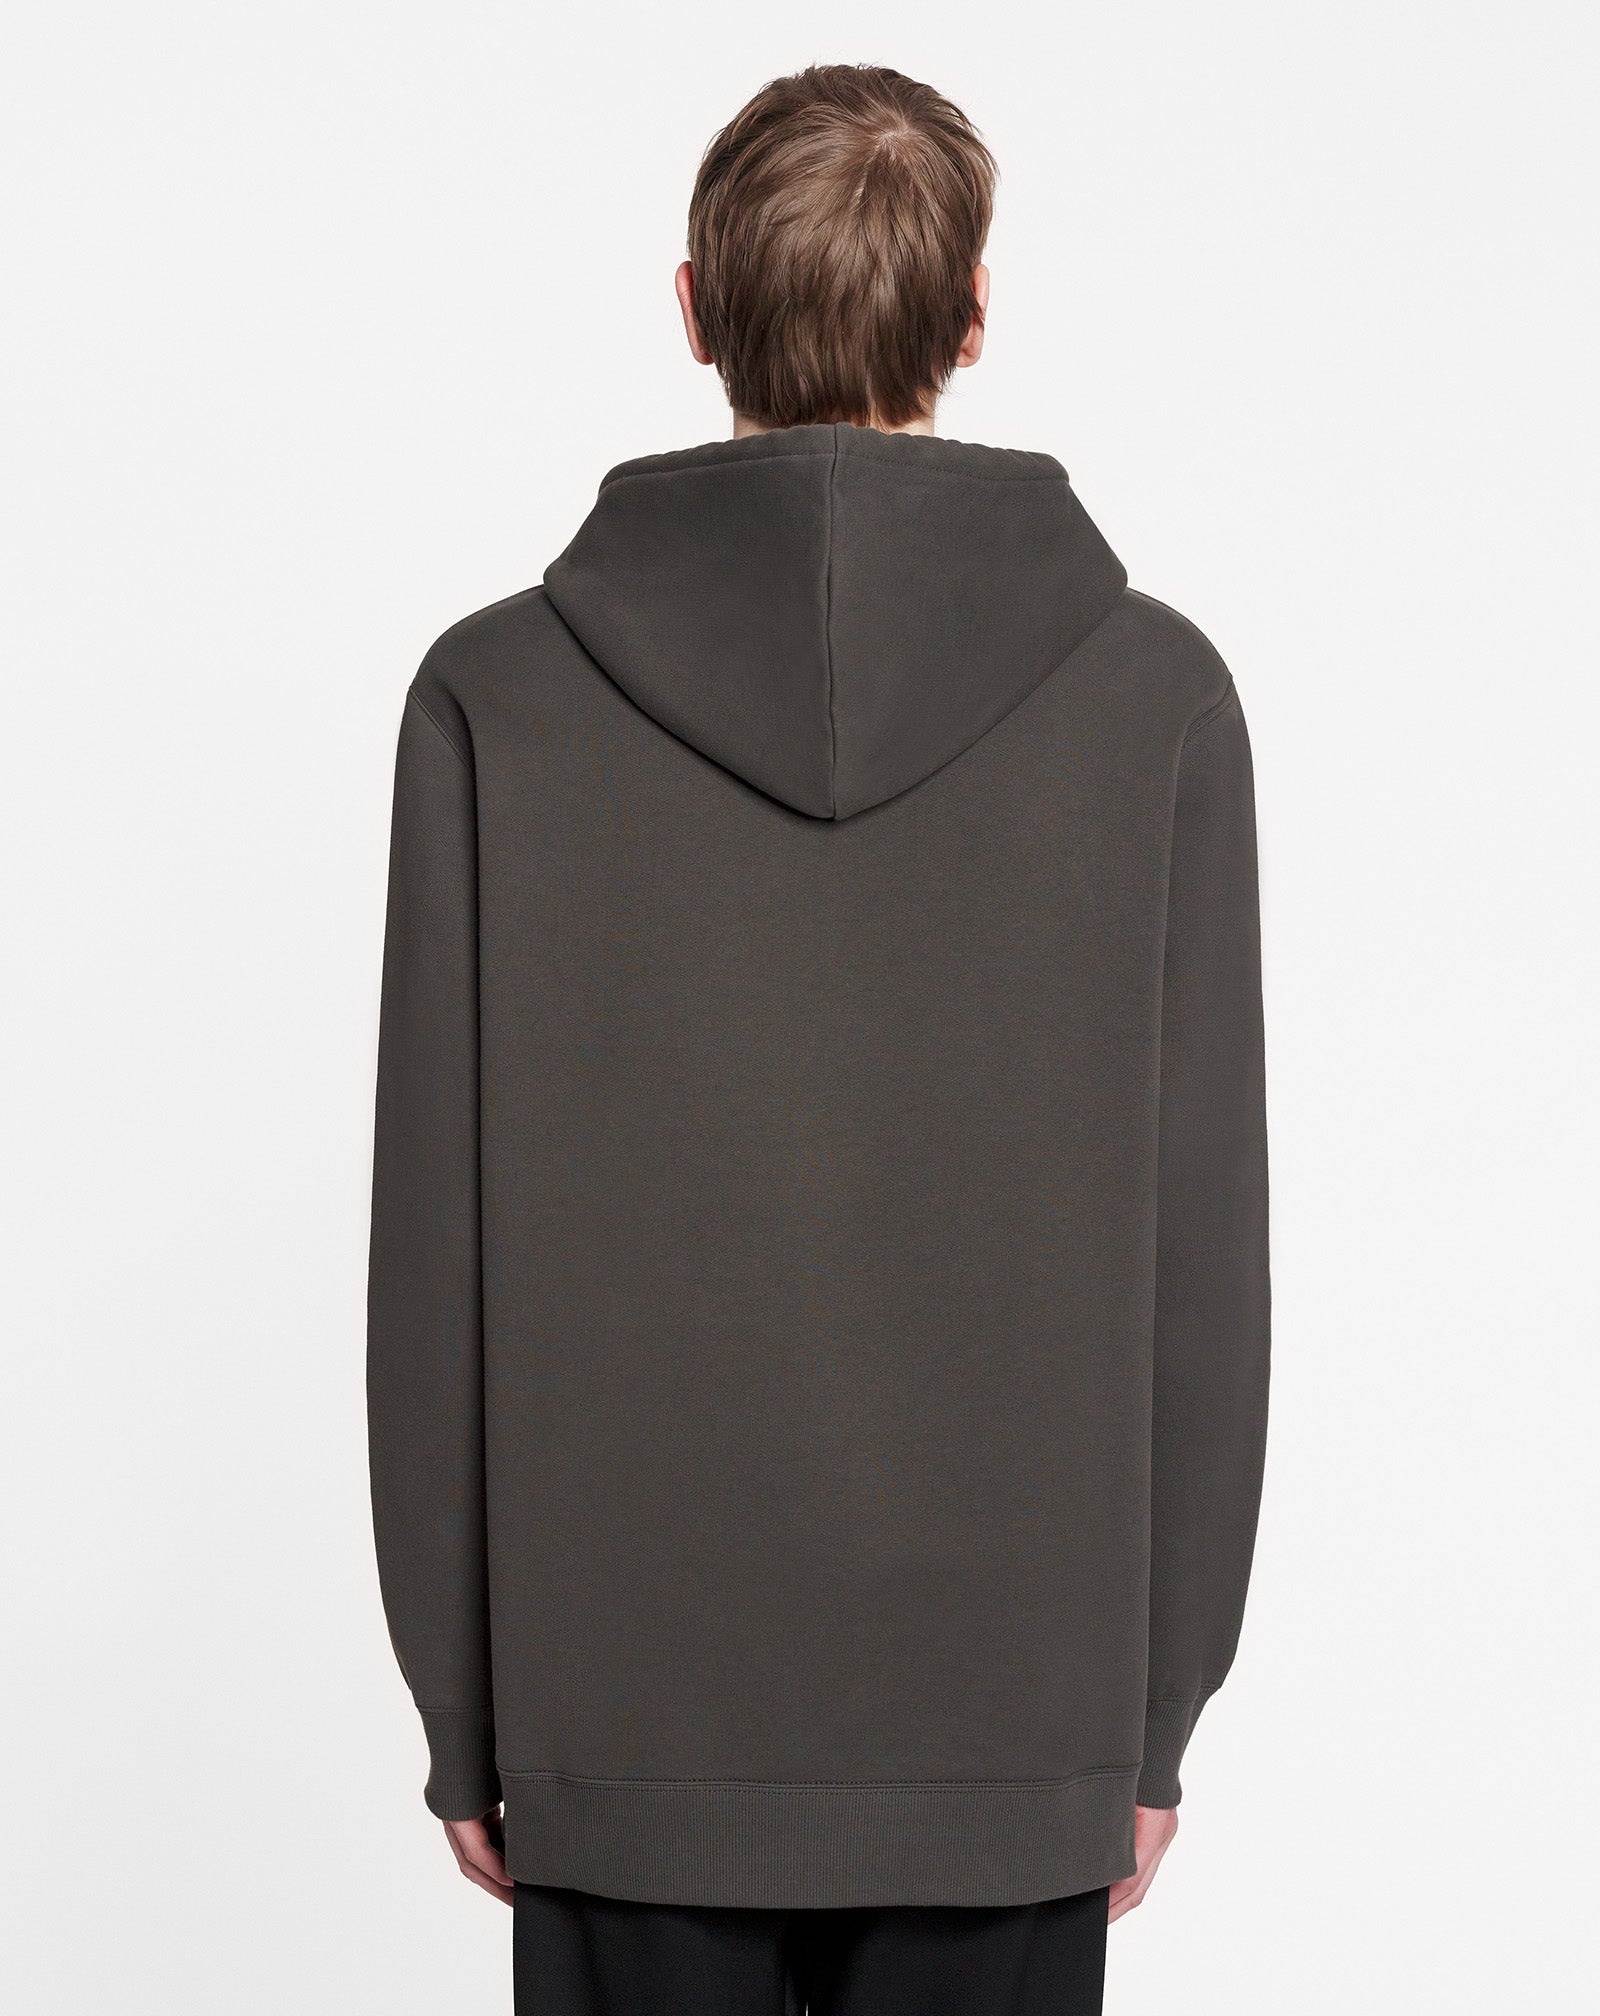 OVERSIZED LANVIN PARIS EMBROIDERED HOODIE - 4